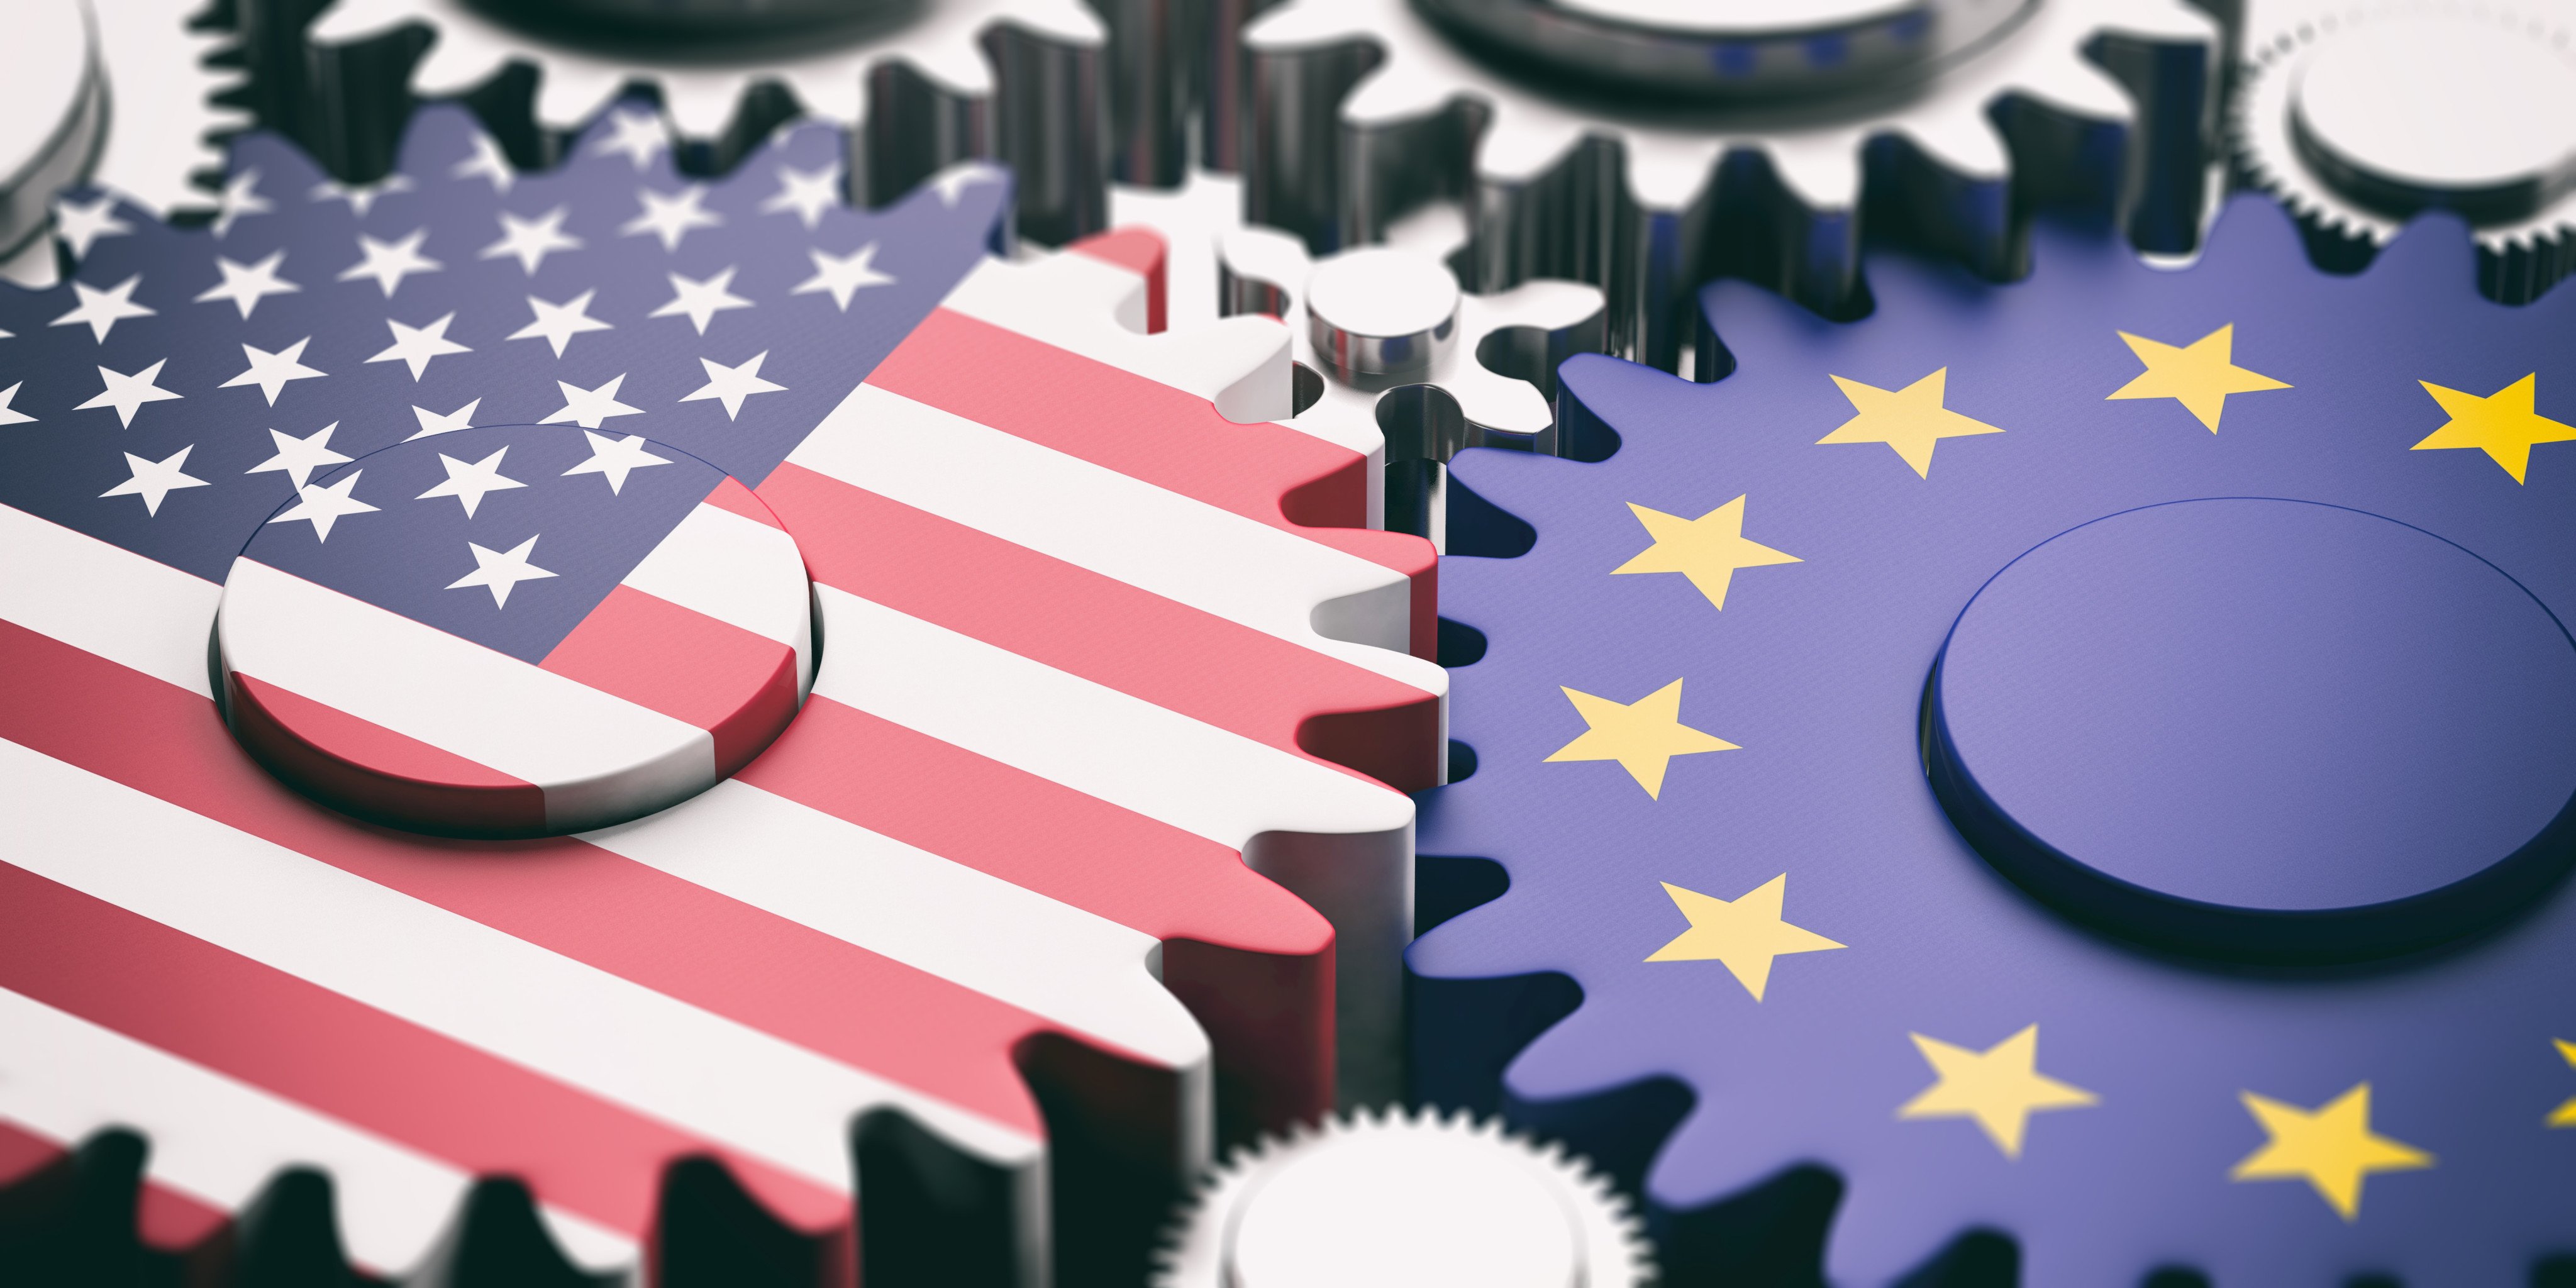 EU and US officials hope to further cooperation on tech and trade stances to counter China. Image: Shutterstock